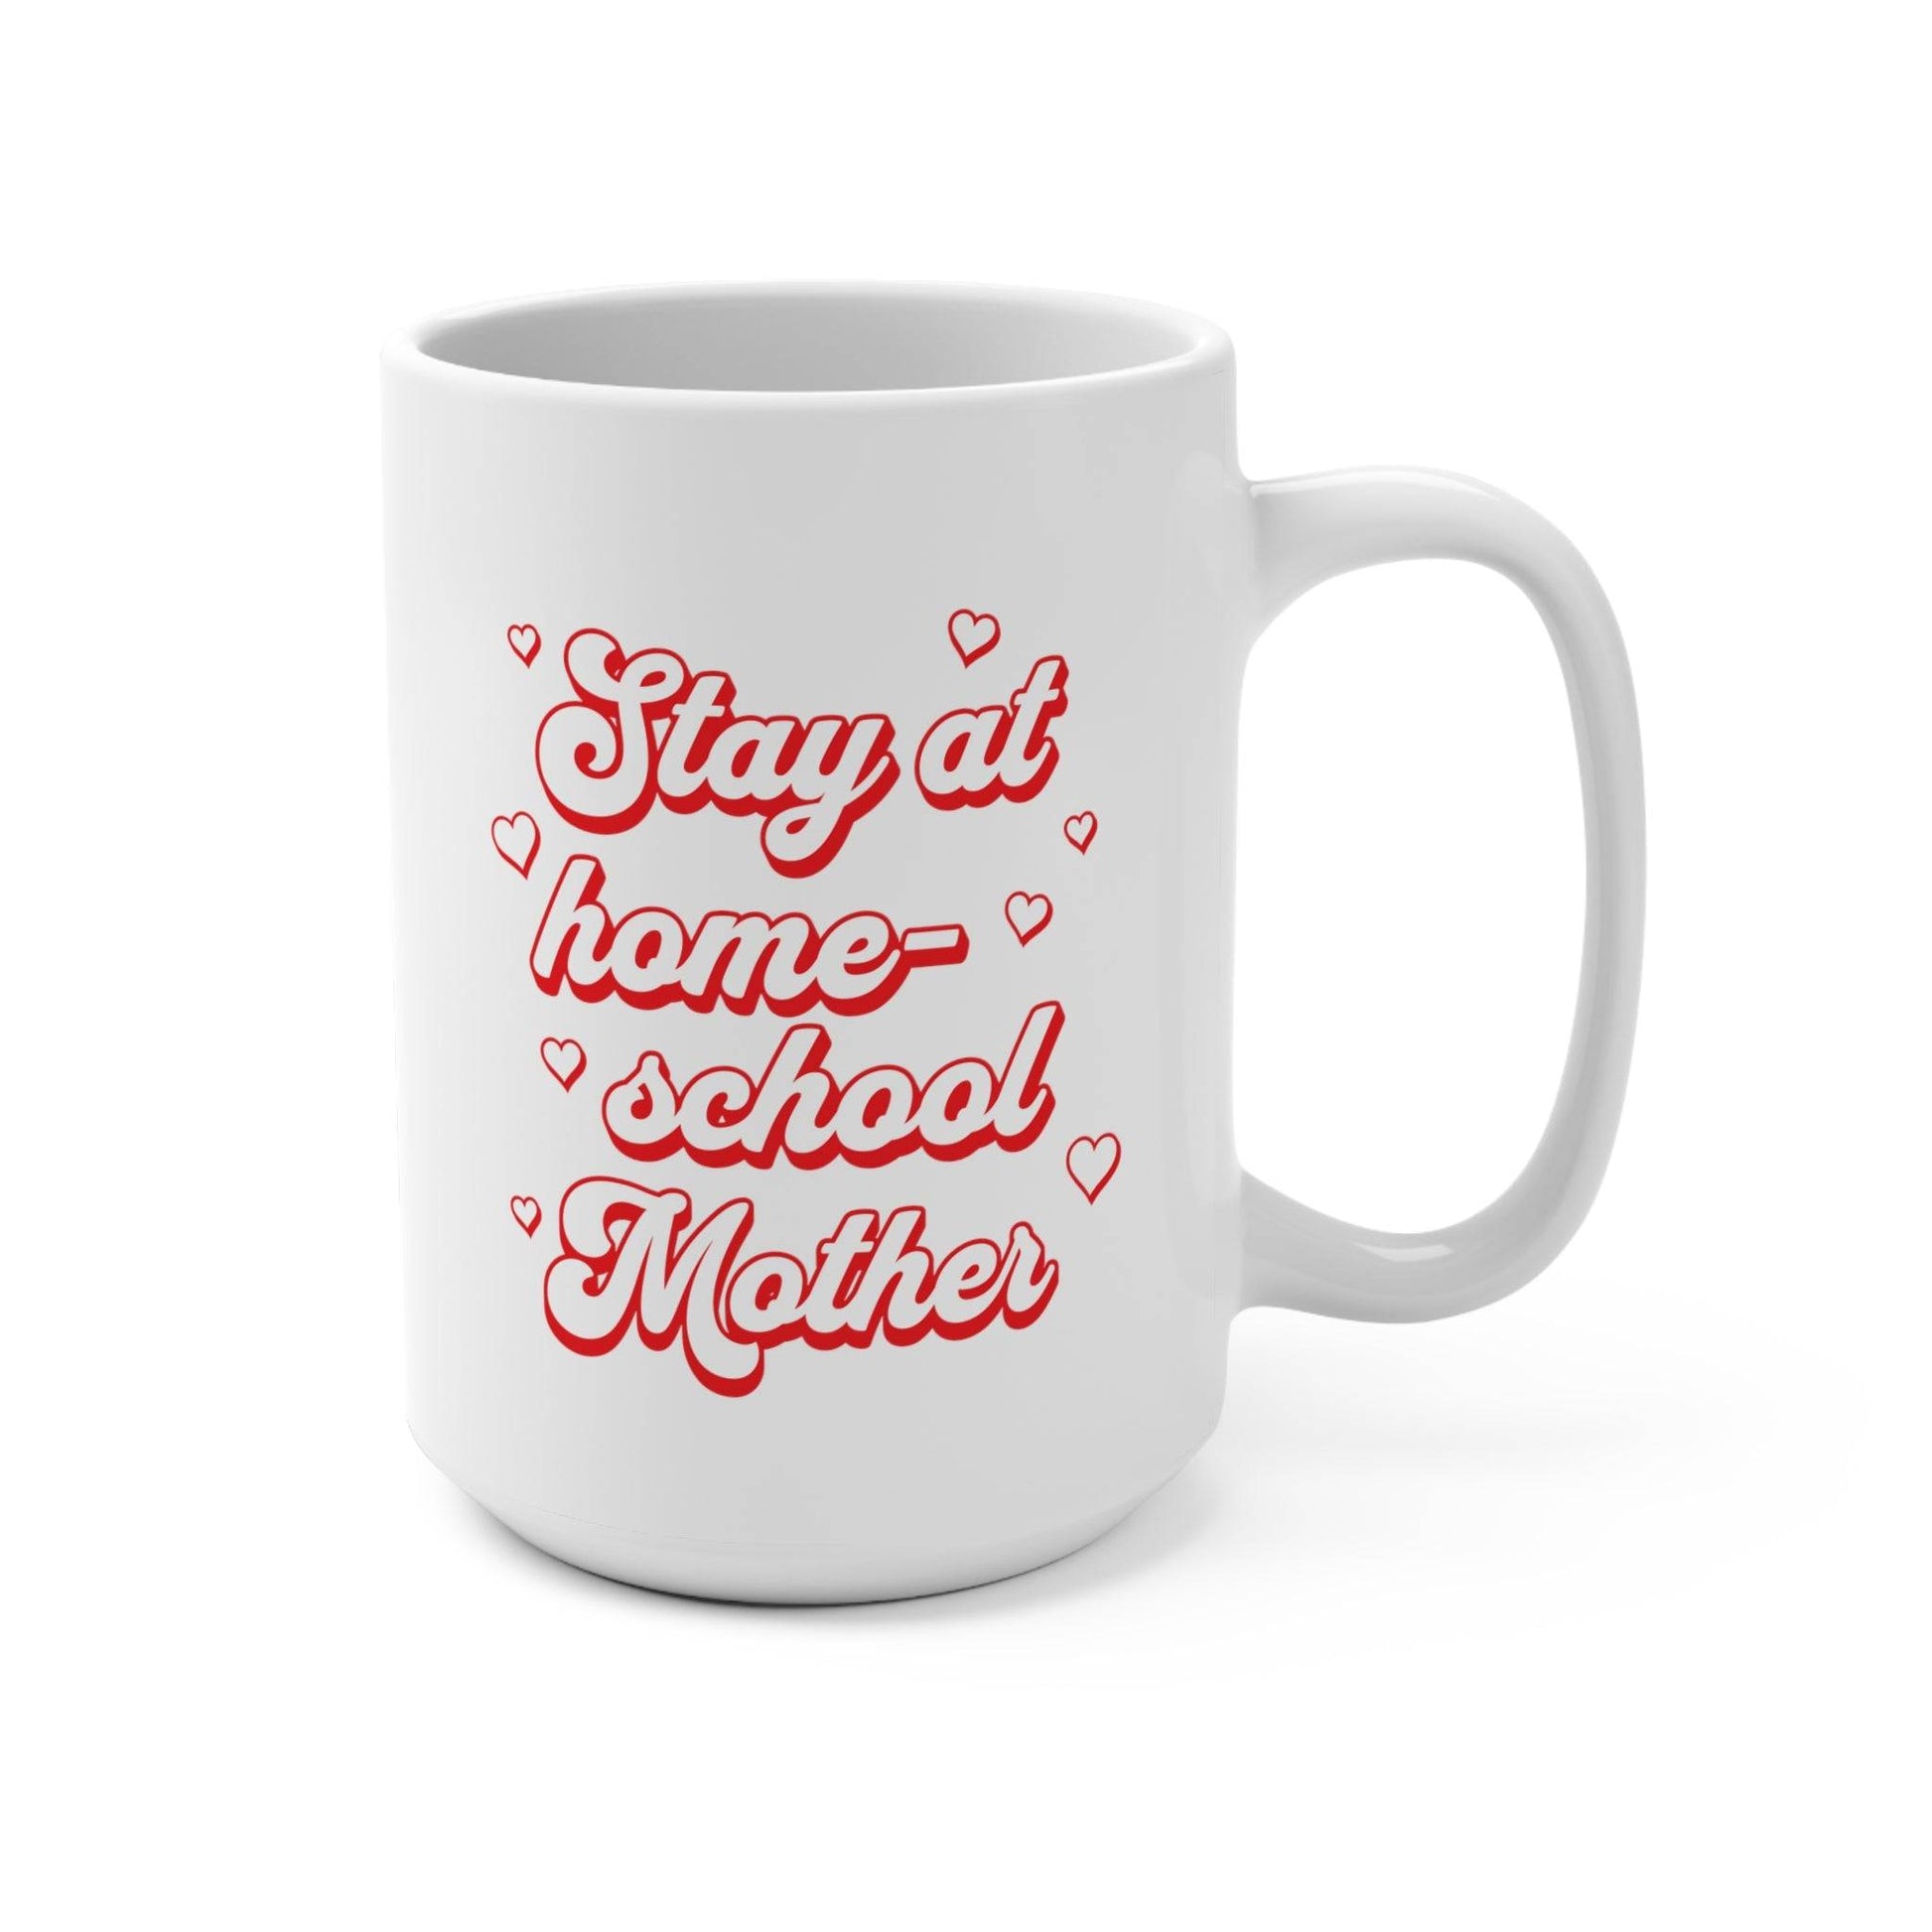 Show your love and dedication for homeschooling with our Stay At Home-school Mother Mug Valentines Day Vibe Hearts cup🩷 White mug with red writing with hearts.